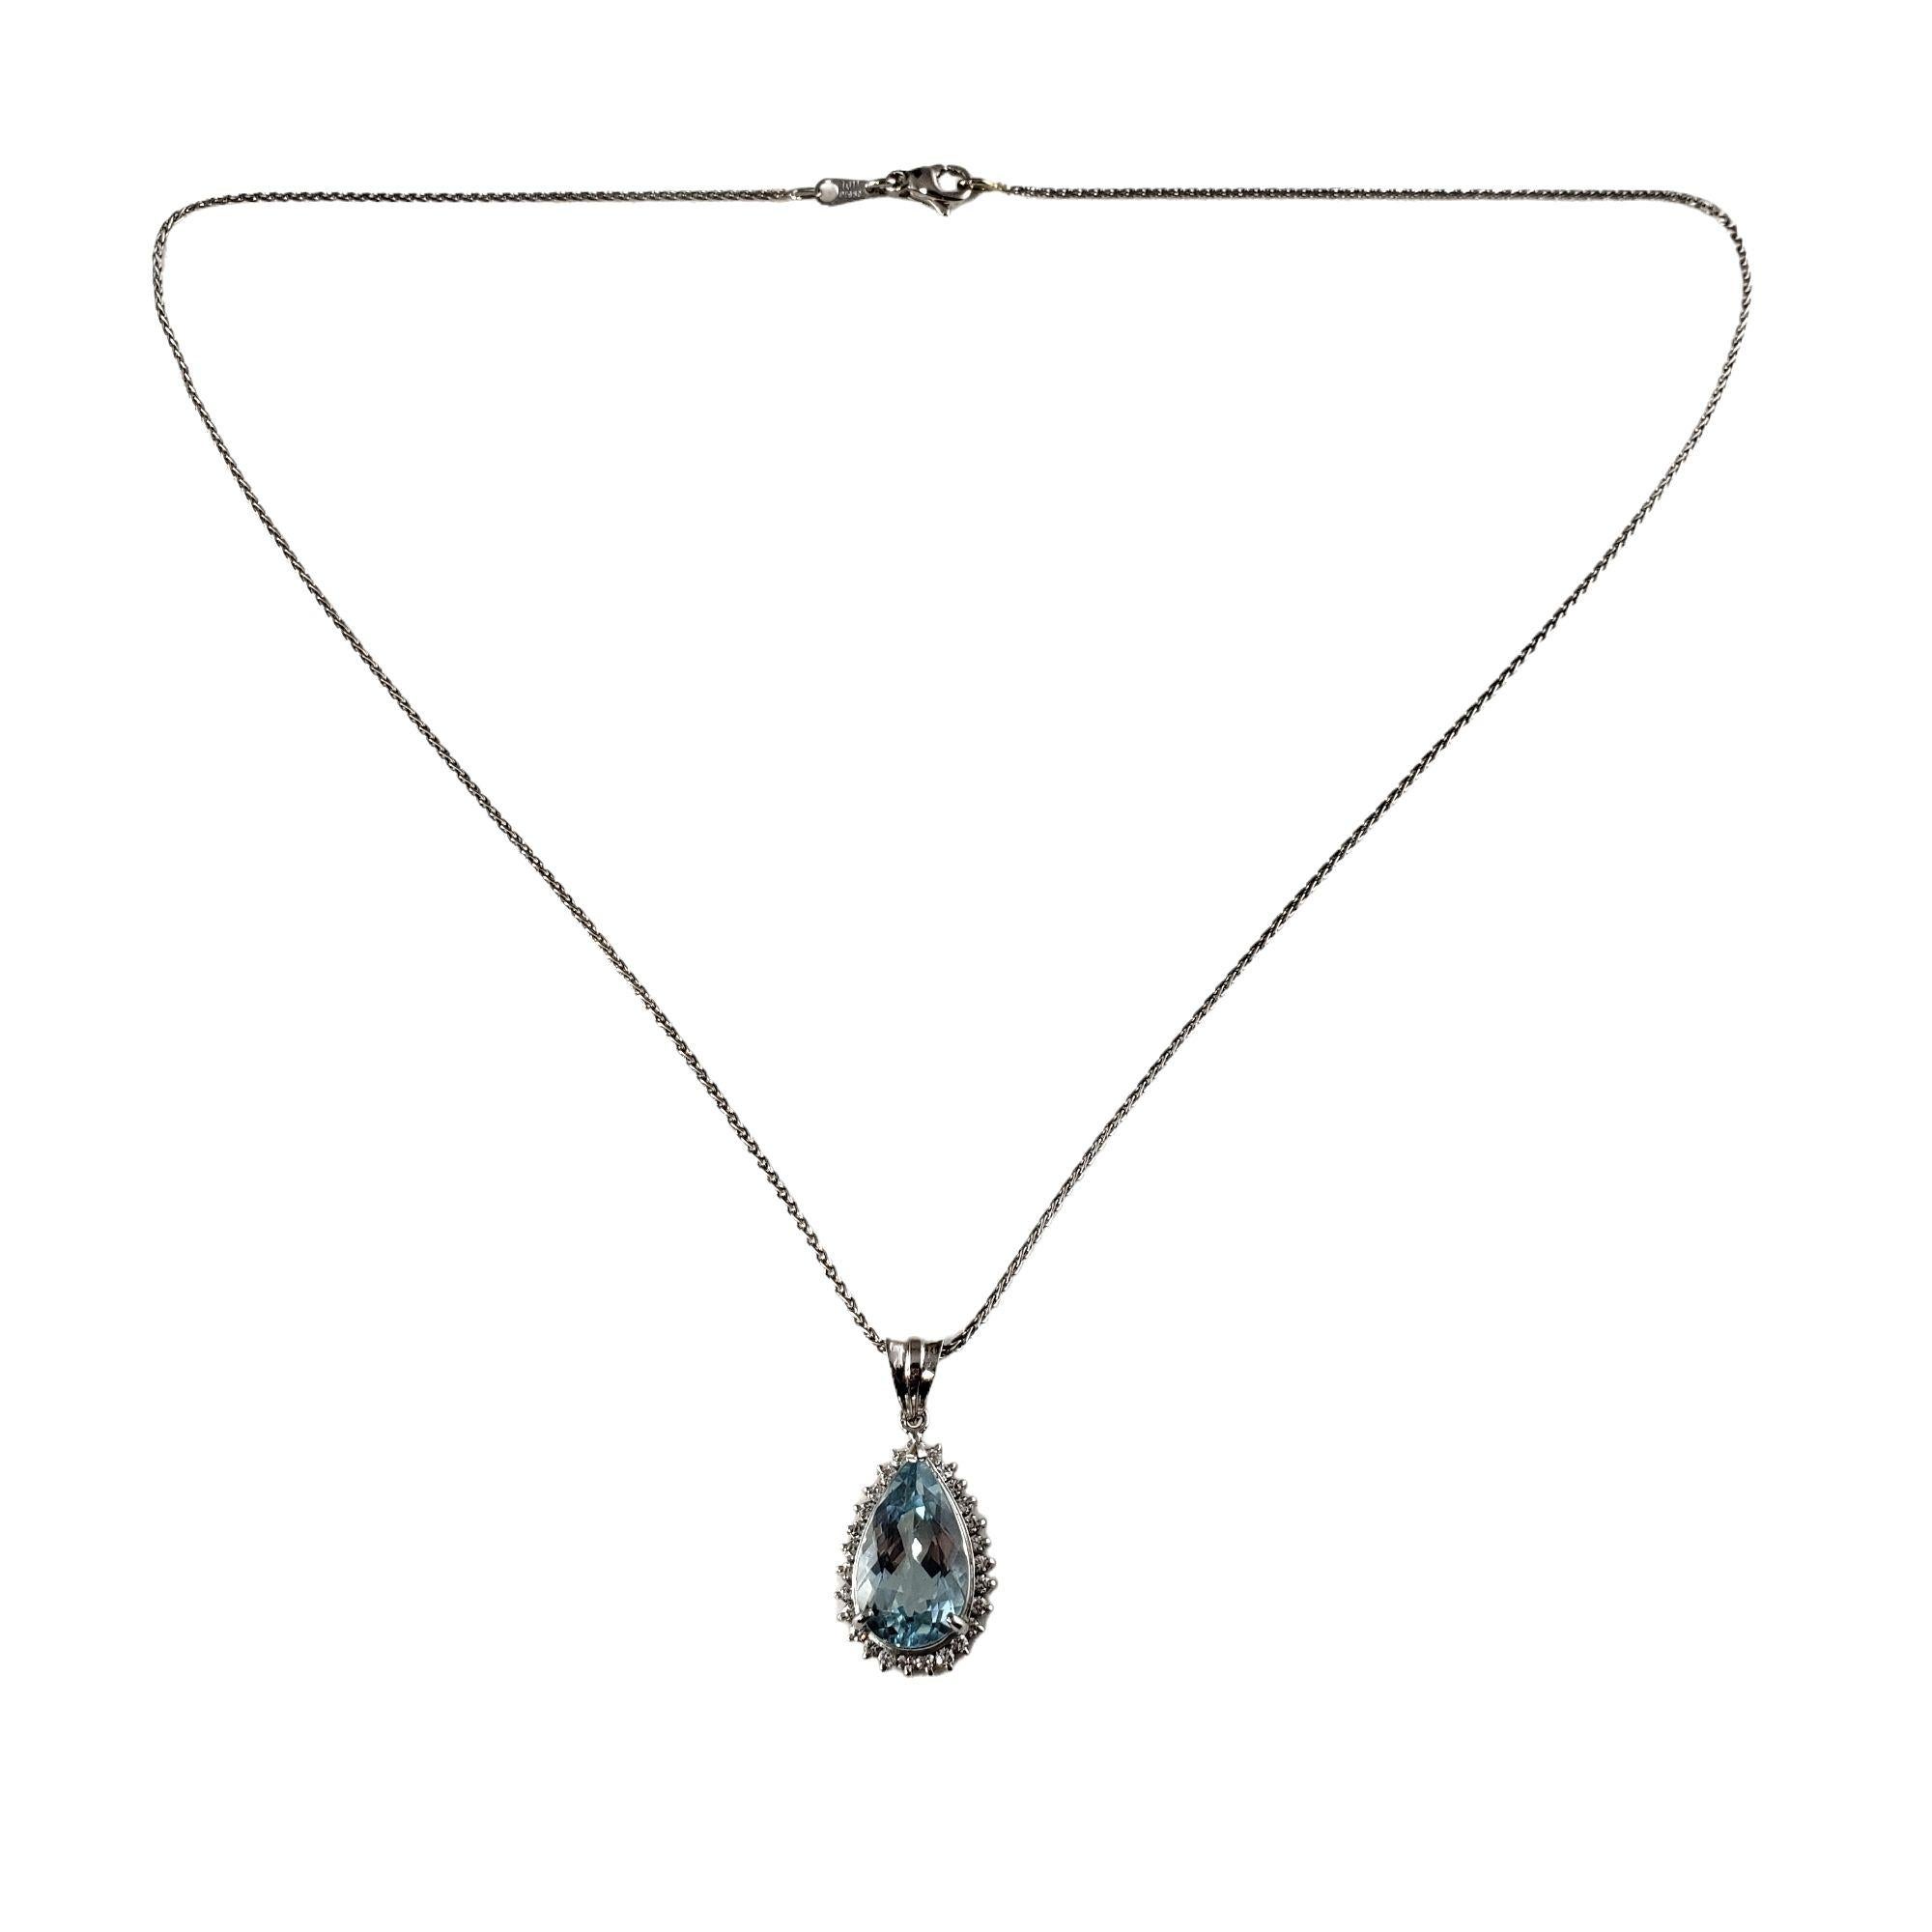 Vintage 18 Karat White Gold Aquamarine and Diamond Pendant Necklace JAGi Certified-

This stunning necklace features one pear shaped cut aquamarine (16 mm x 9 mm) and 27 round brilliant cut diamonds set in classic platinum. Suspends from an elegant